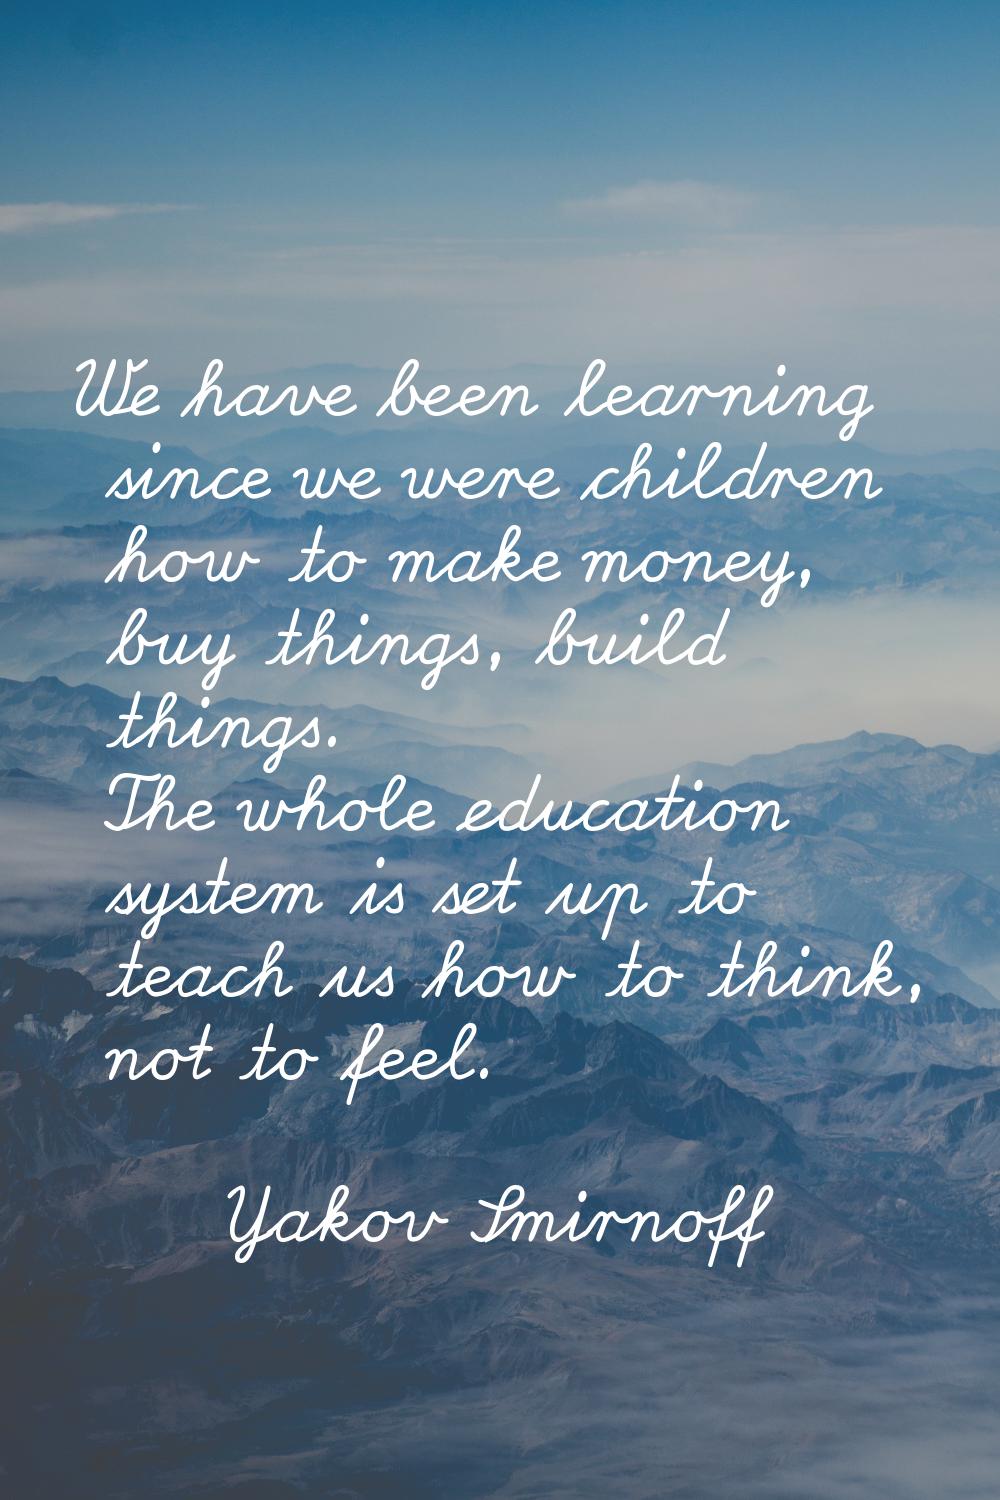 We have been learning since we were children how to make money, buy things, build things. The whole